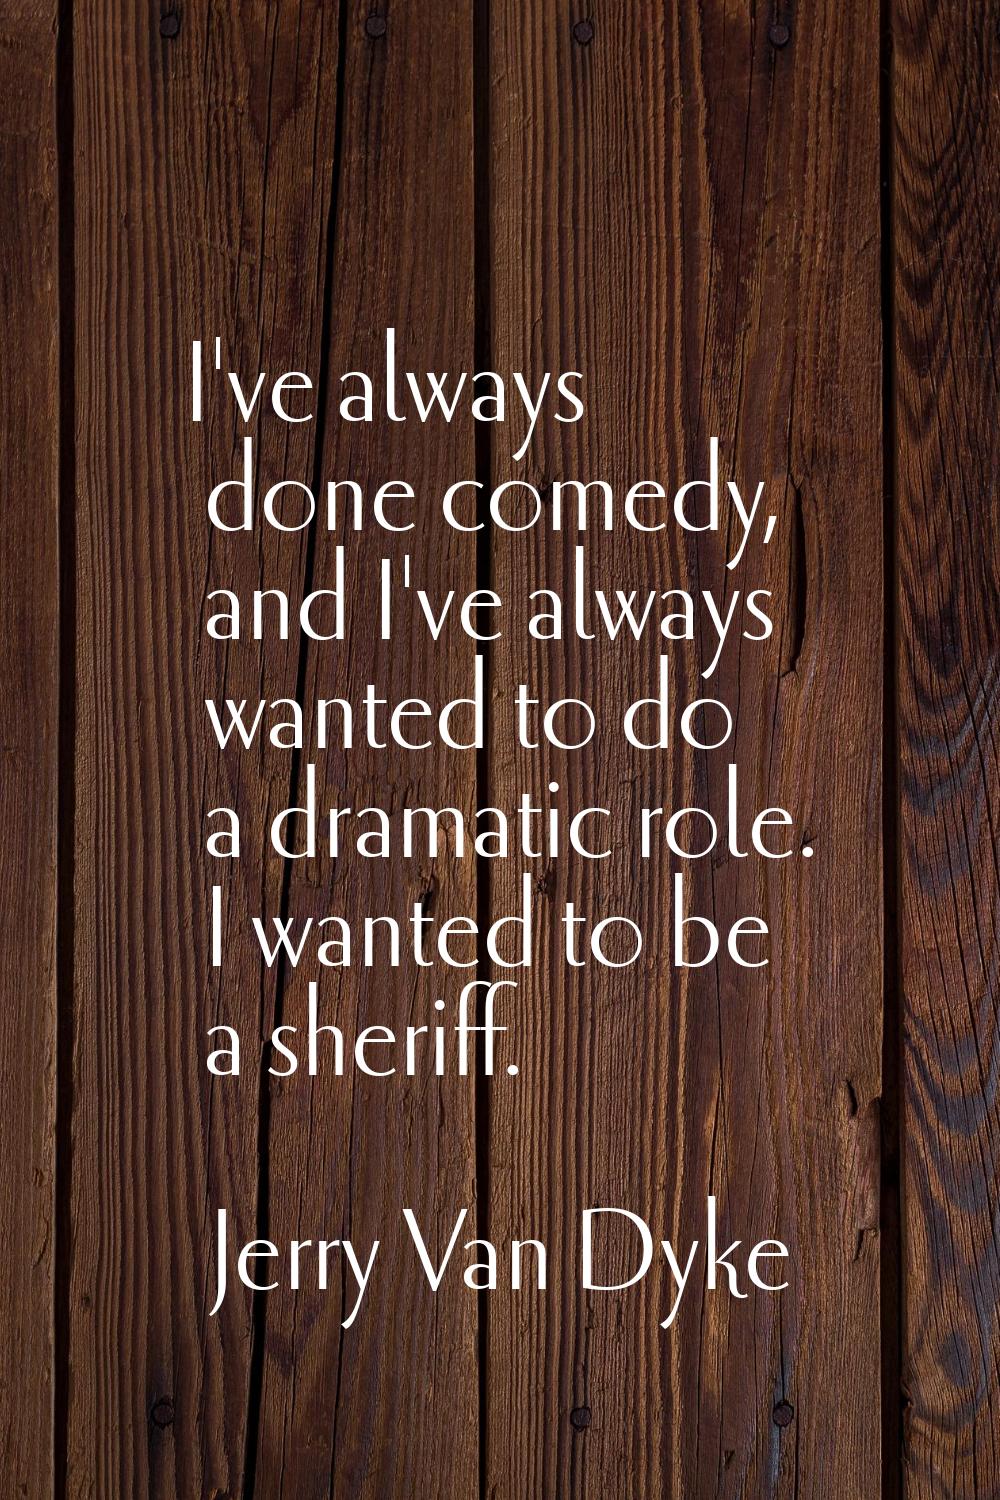 I've always done comedy, and I've always wanted to do a dramatic role. I wanted to be a sheriff.